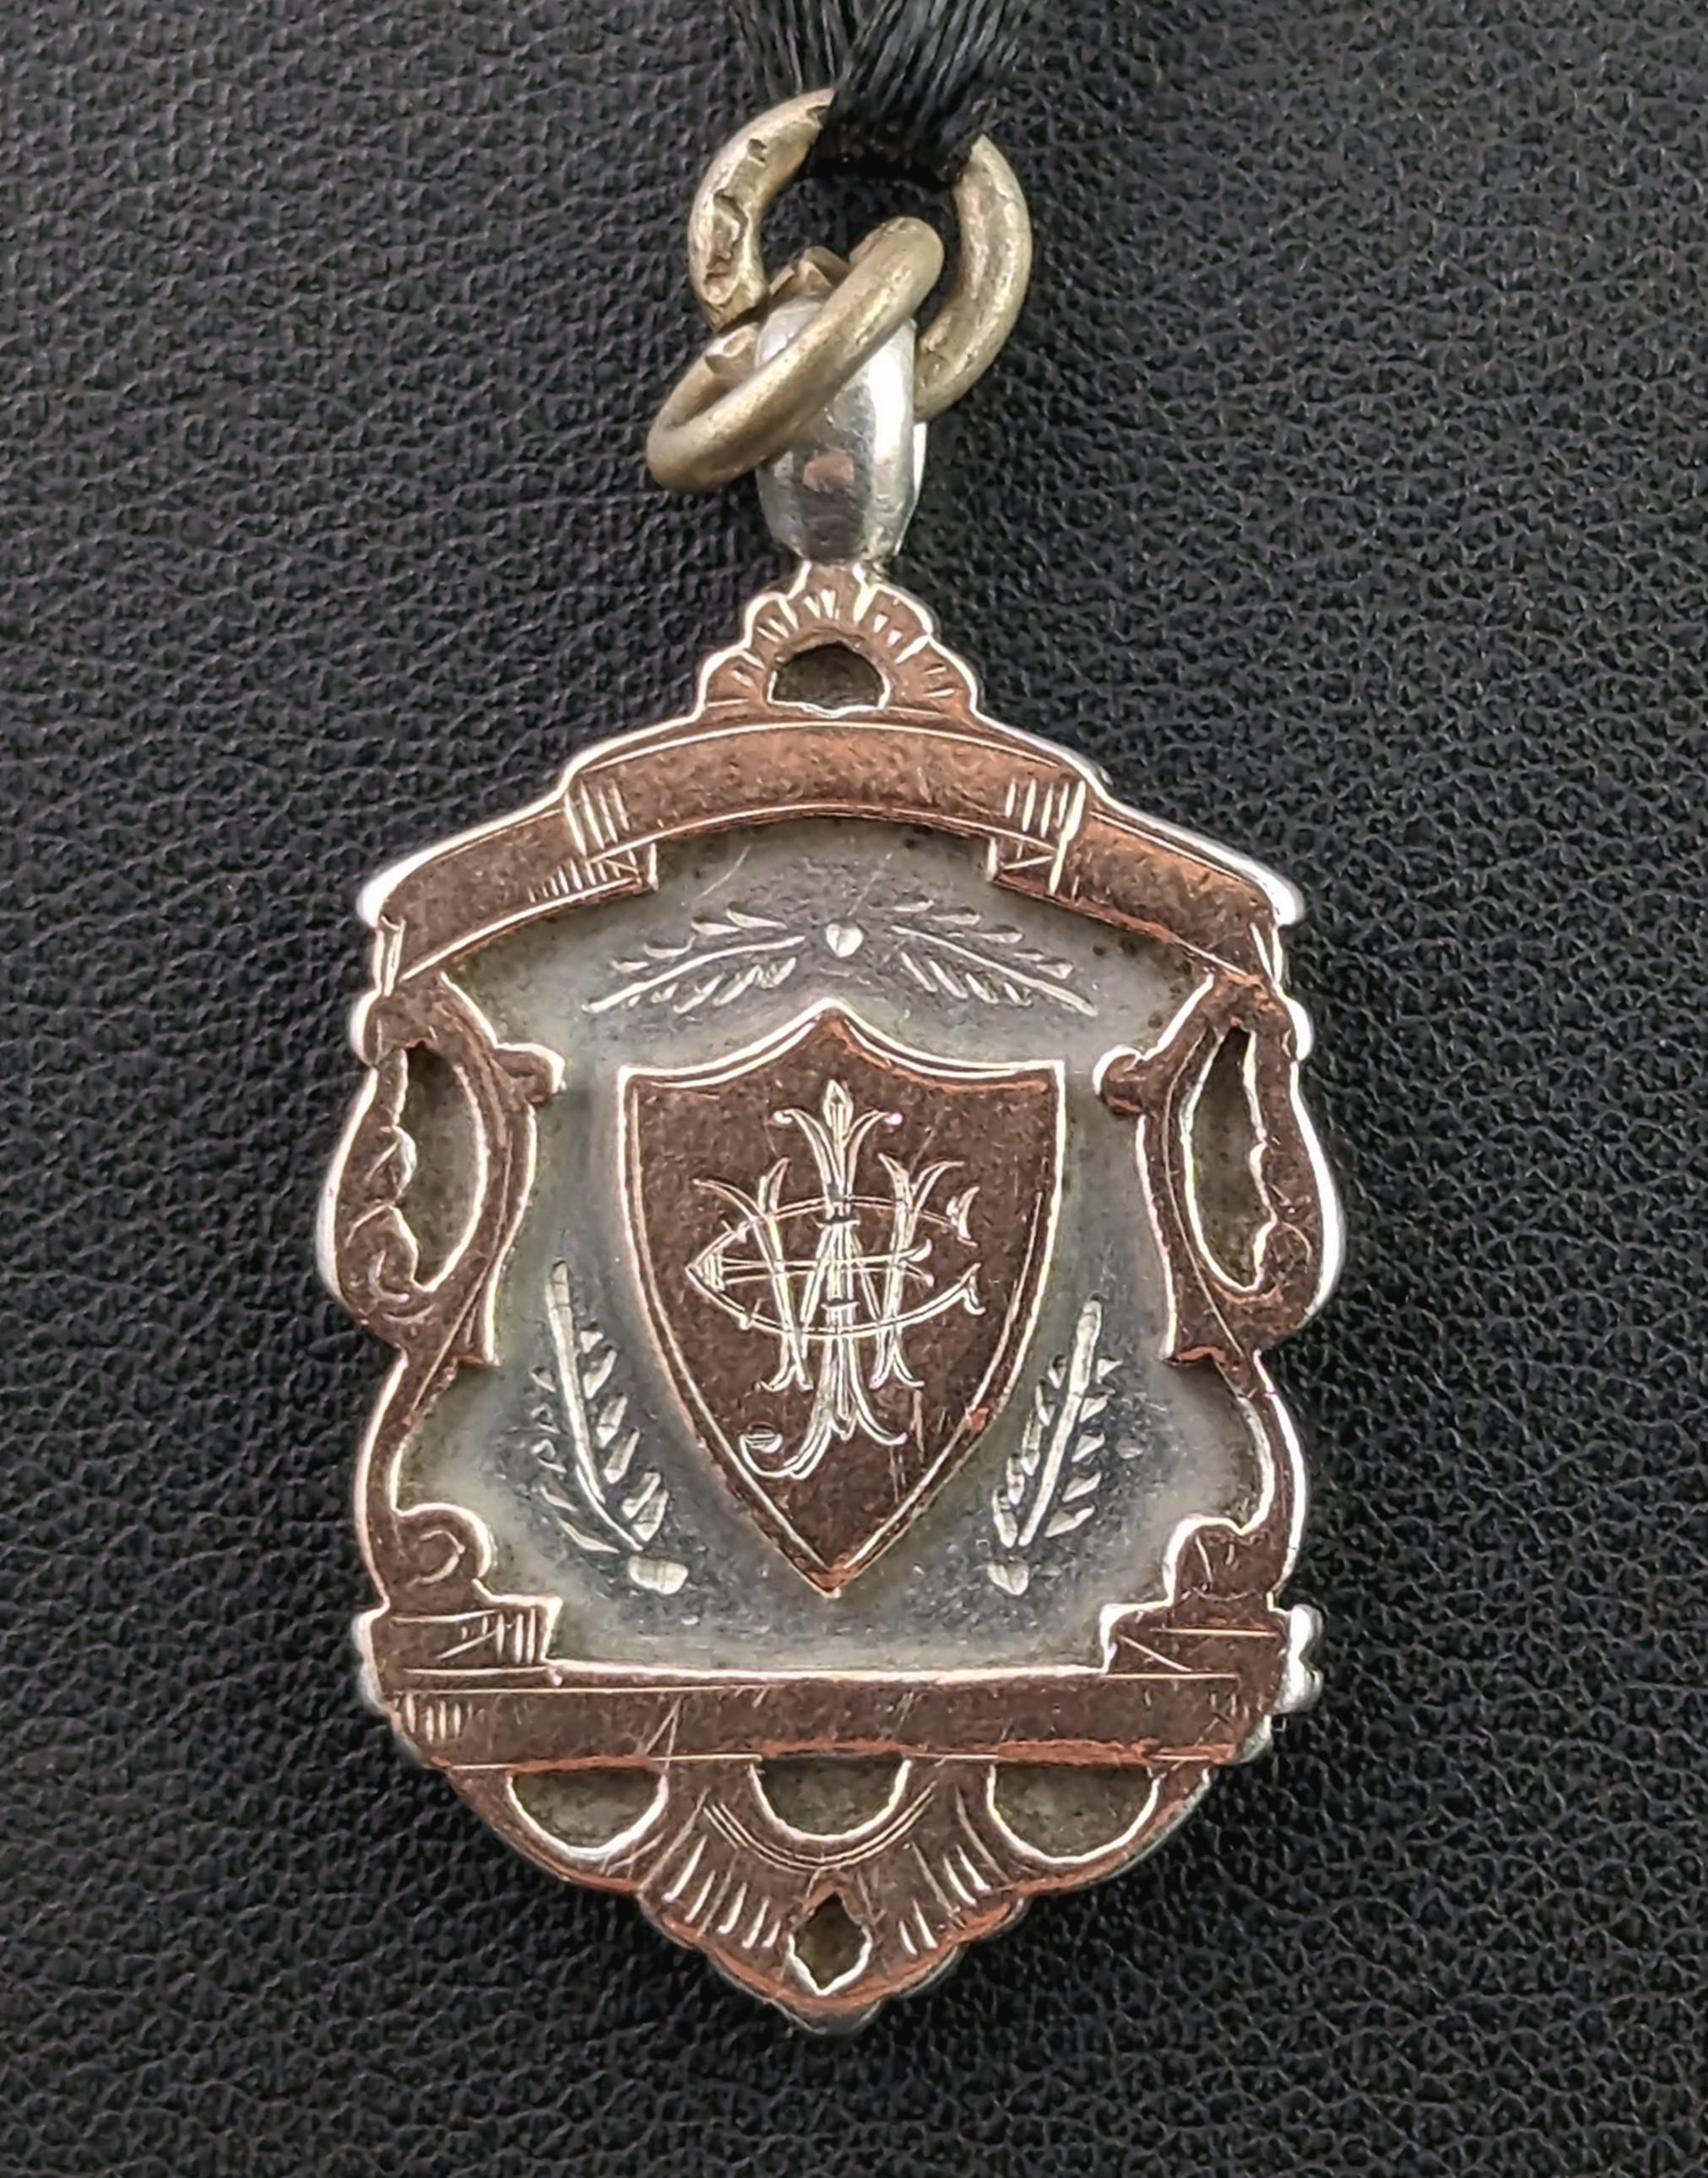 Antique shield fob pendant,  silver and 9k rose gold, Edwardian  4